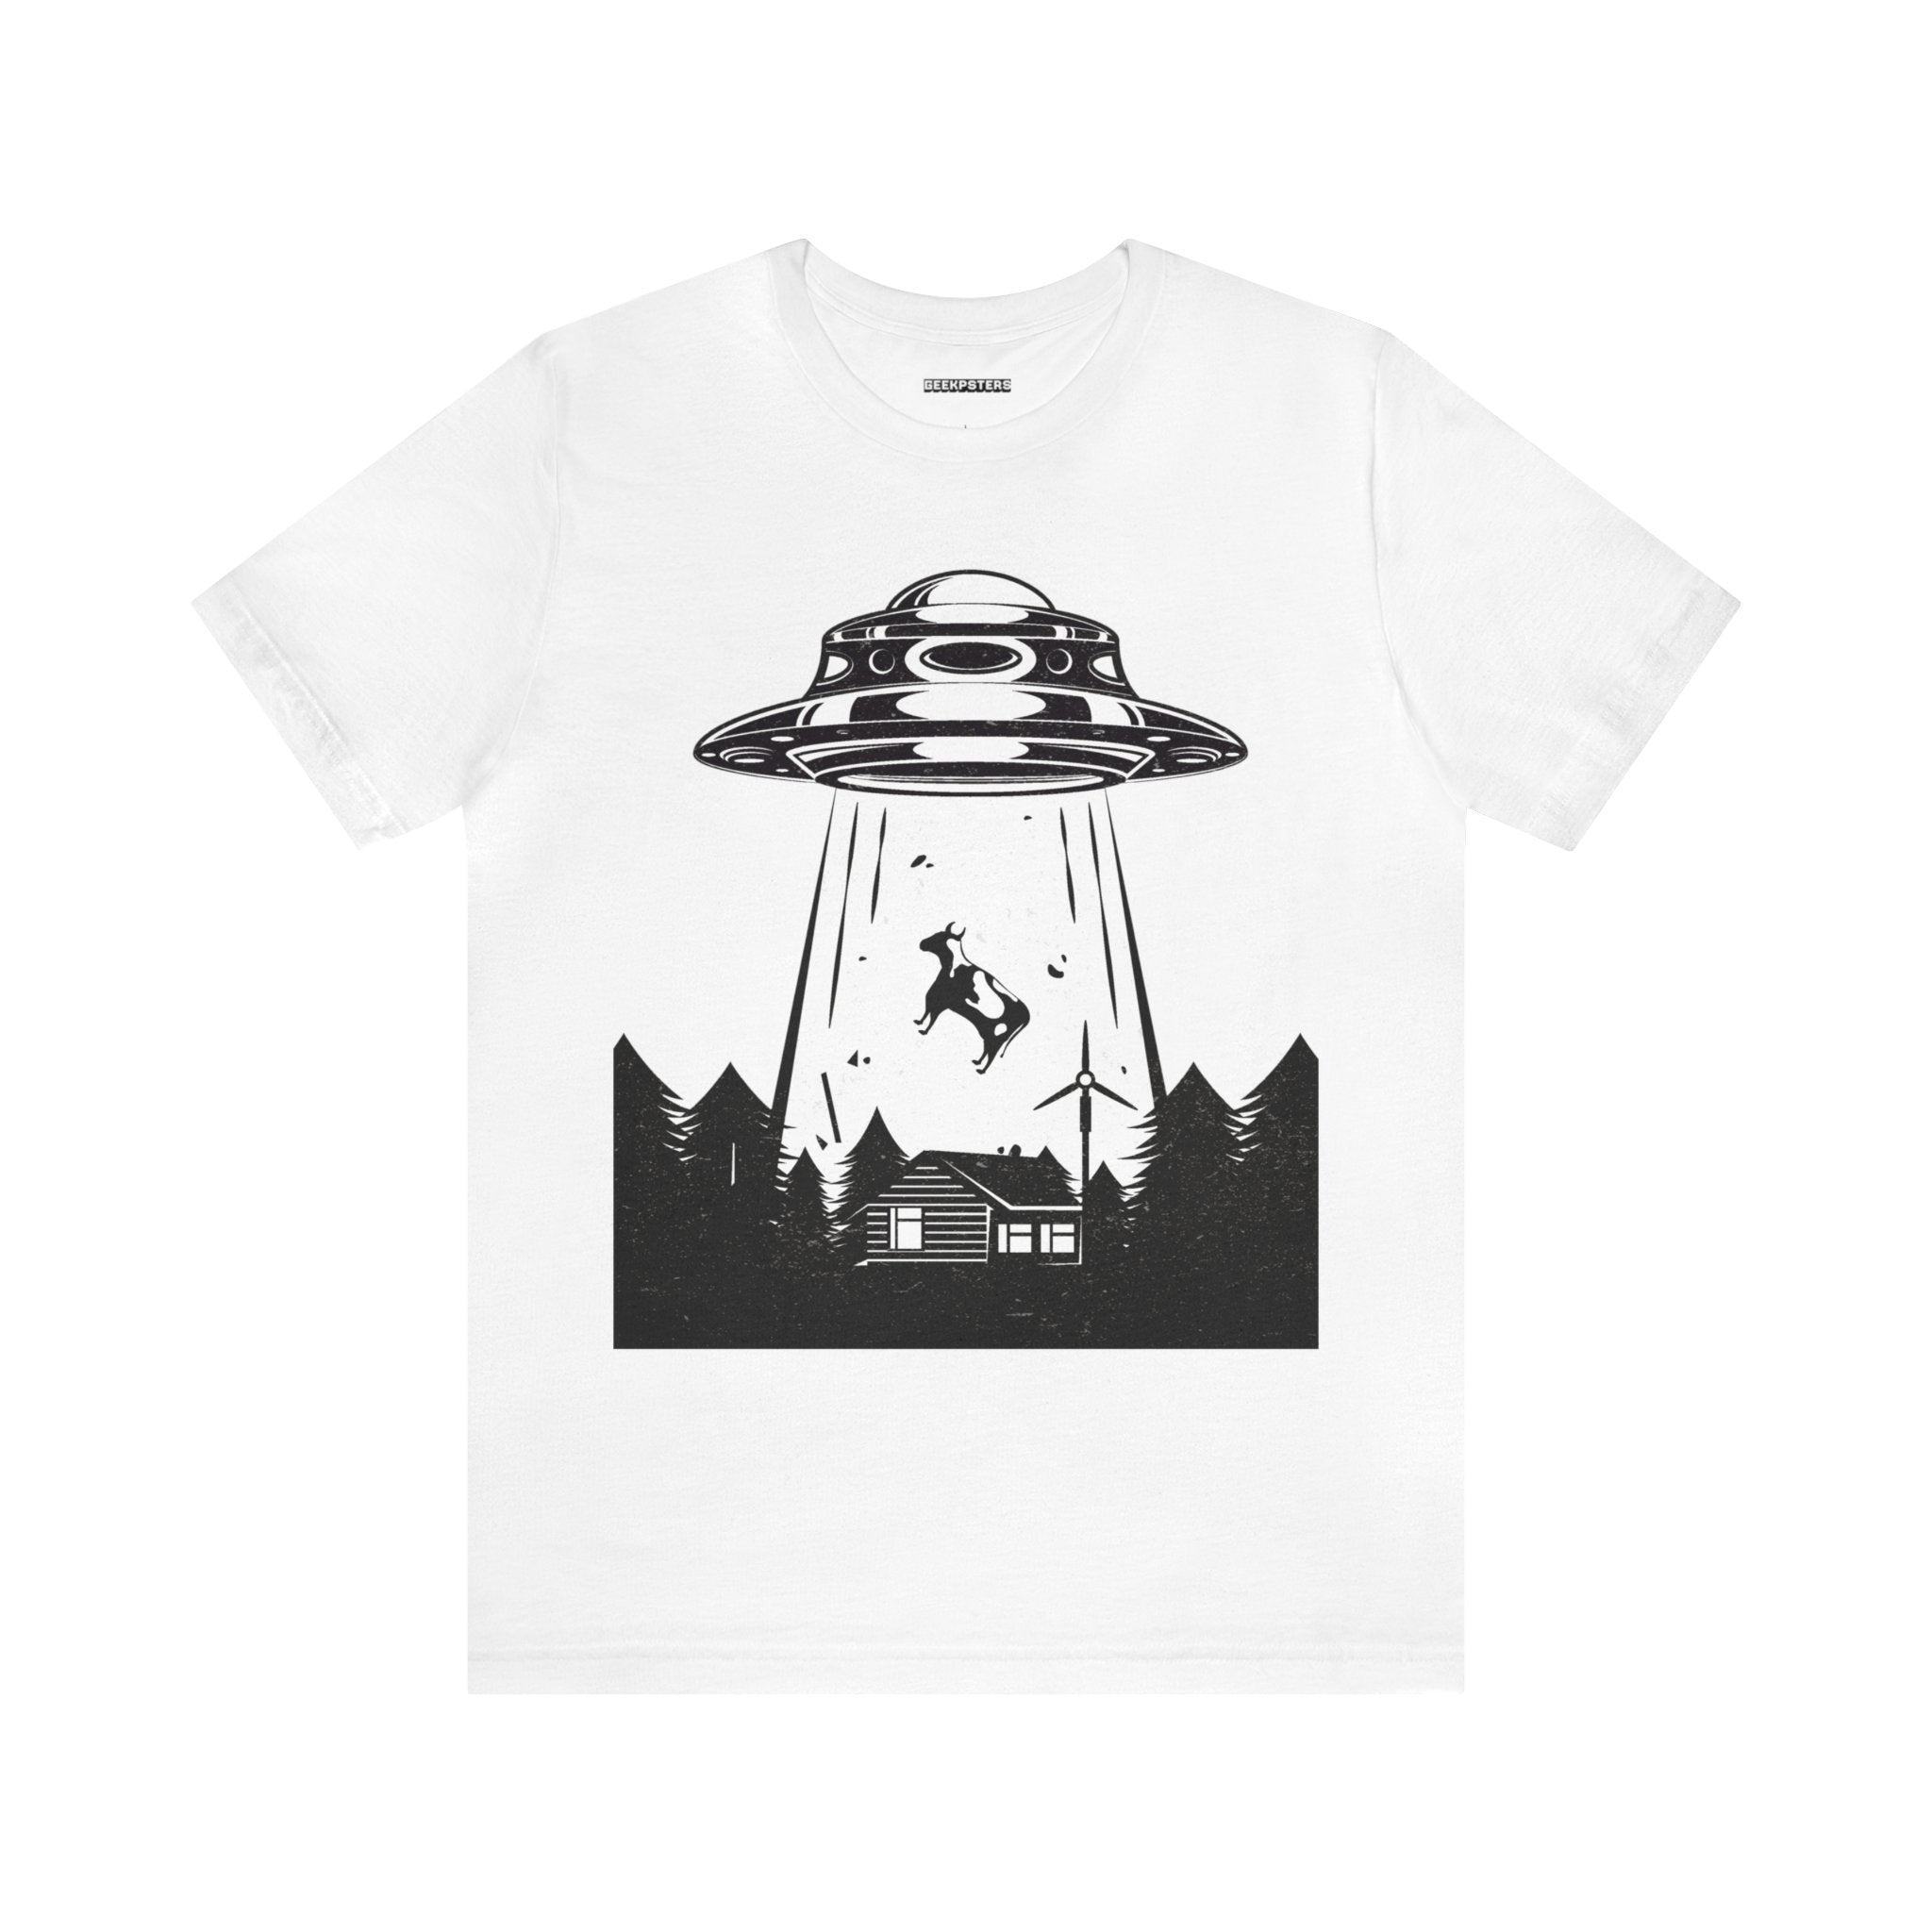 For sci-fi enthusiasts and Alien Abduction fans, this geeky accessory features a UFO flying over a house on a white t-shirt.